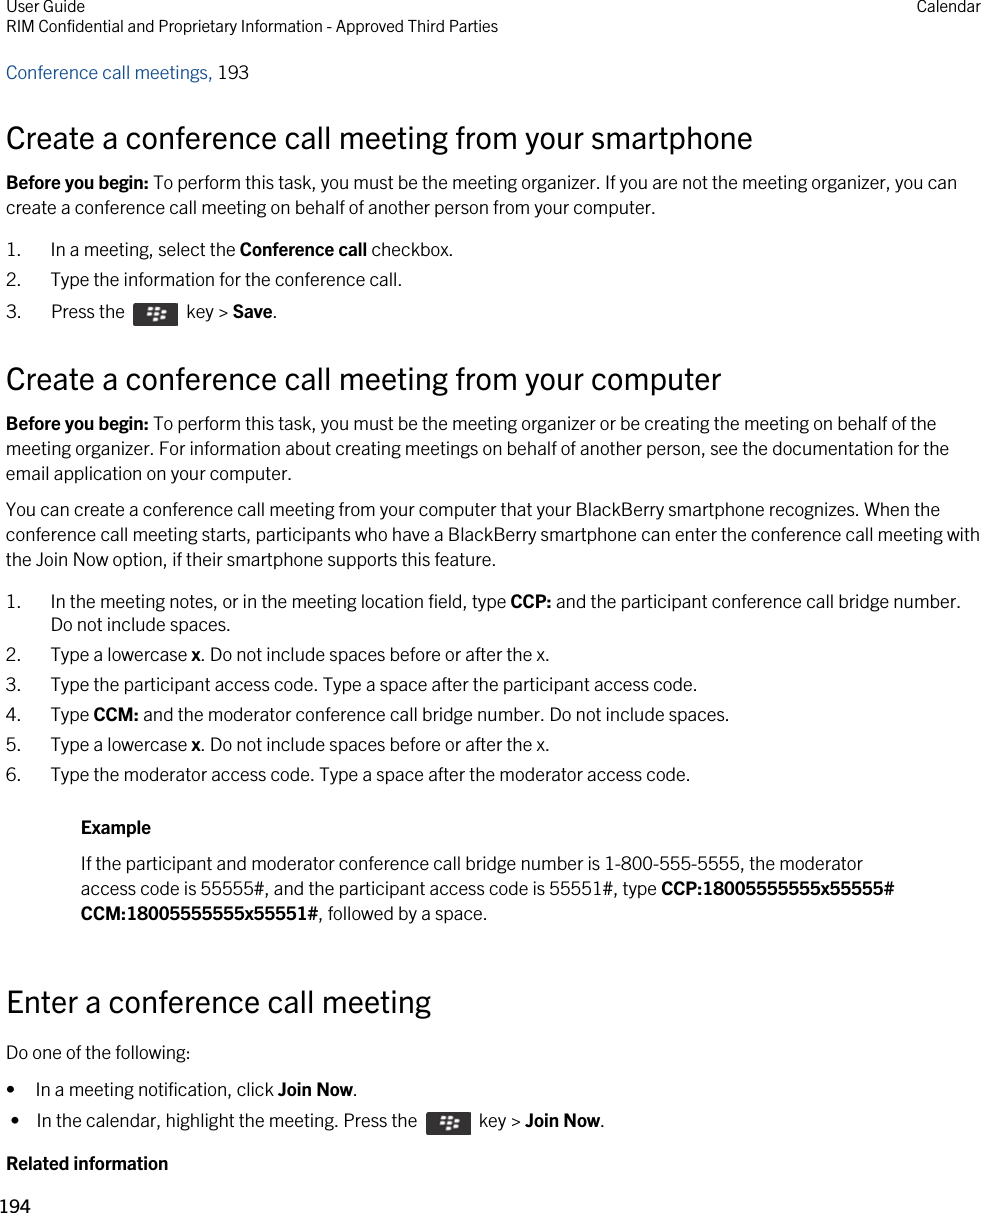 Conference call meetings, 193 Create a conference call meeting from your smartphoneBefore you begin: To perform this task, you must be the meeting organizer. If you are not the meeting organizer, you can create a conference call meeting on behalf of another person from your computer.1. In a meeting, select the Conference call checkbox.2. Type the information for the conference call.3.  Press the    key &gt; Save. Create a conference call meeting from your computerBefore you begin: To perform this task, you must be the meeting organizer or be creating the meeting on behalf of the meeting organizer. For information about creating meetings on behalf of another person, see the documentation for the email application on your computer.You can create a conference call meeting from your computer that your BlackBerry smartphone recognizes. When the conference call meeting starts, participants who have a BlackBerry smartphone can enter the conference call meeting with the Join Now option, if their smartphone supports this feature.1. In the meeting notes, or in the meeting location field, type CCP: and the participant conference call bridge number. Do not include spaces.2. Type a lowercase x. Do not include spaces before or after the x.3. Type the participant access code. Type a space after the participant access code.4. Type CCM: and the moderator conference call bridge number. Do not include spaces.5. Type a lowercase x. Do not include spaces before or after the x.6. Type the moderator access code. Type a space after the moderator access code.ExampleIf the participant and moderator conference call bridge number is 1-800-555-5555, the moderator access code is 55555#, and the participant access code is 55551#, type CCP:18005555555x55555# CCM:18005555555x55551#, followed by a space.Enter a conference call meetingDo one of the following:• In a meeting notification, click Join Now. •  In the calendar, highlight the meeting. Press the    key &gt; Join Now.Related informationUser GuideRIM Confidential and Proprietary Information - Approved Third Parties Calendar194 